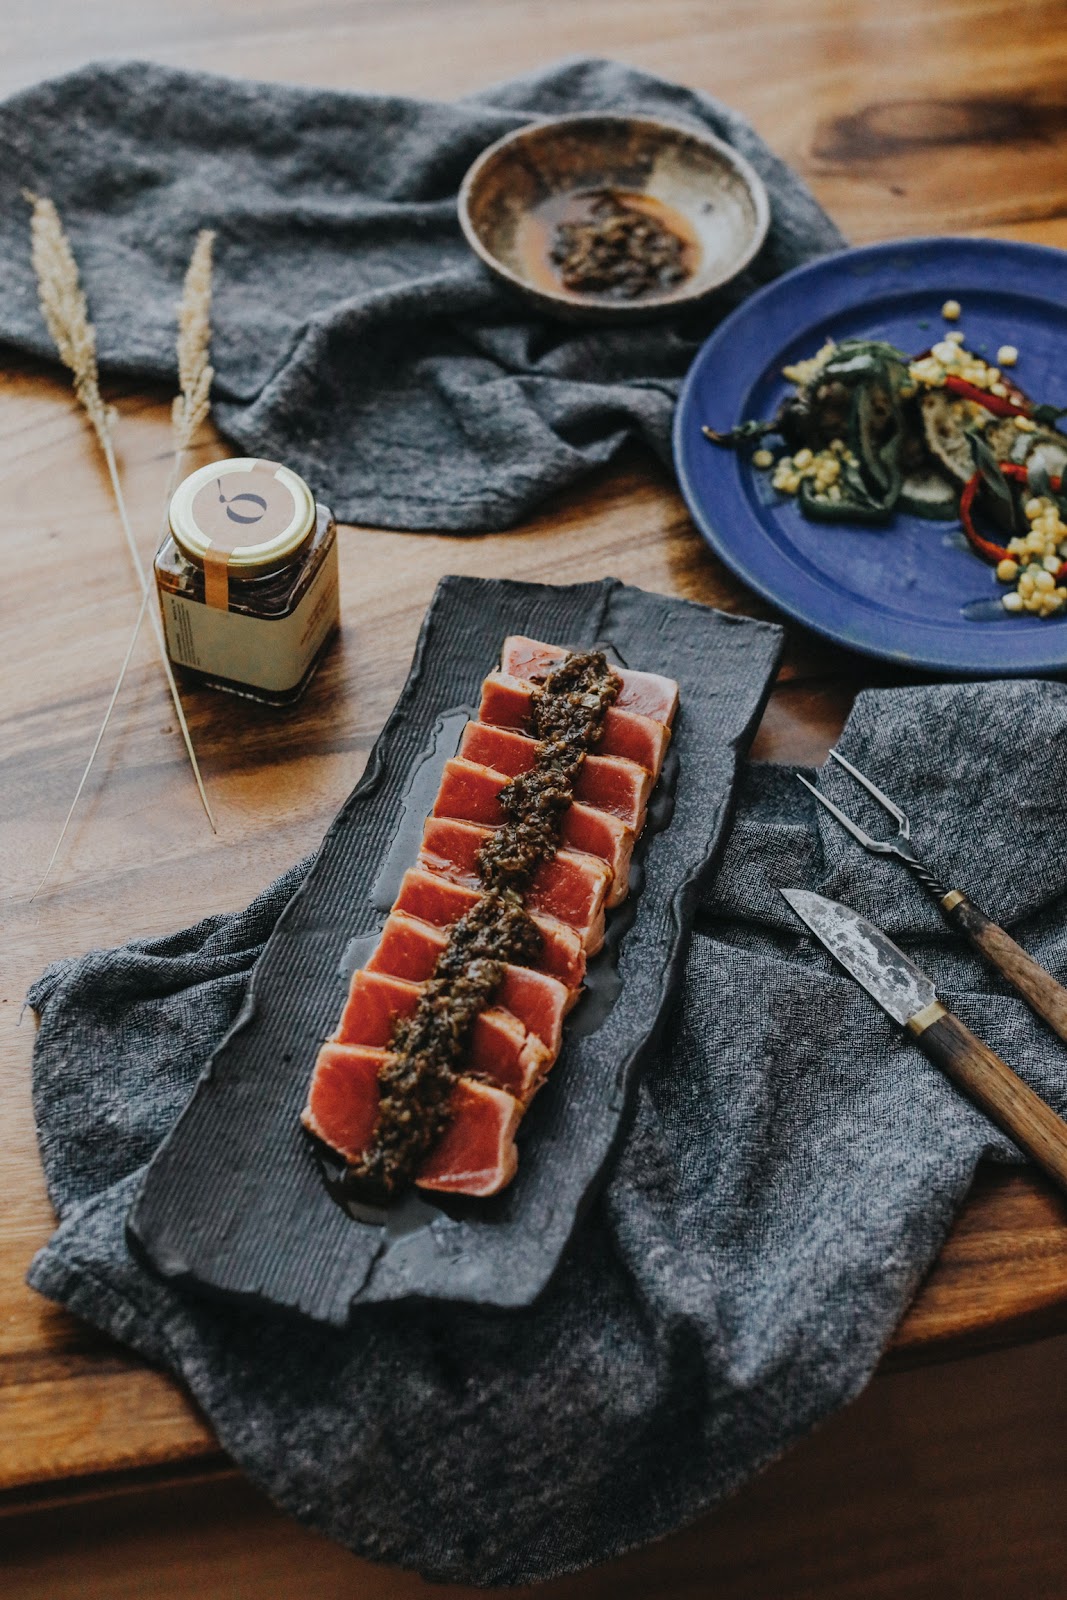 SEARED TUNA LOIN (with a bottle of TAMARIND-ANCHOVY SAUCE)